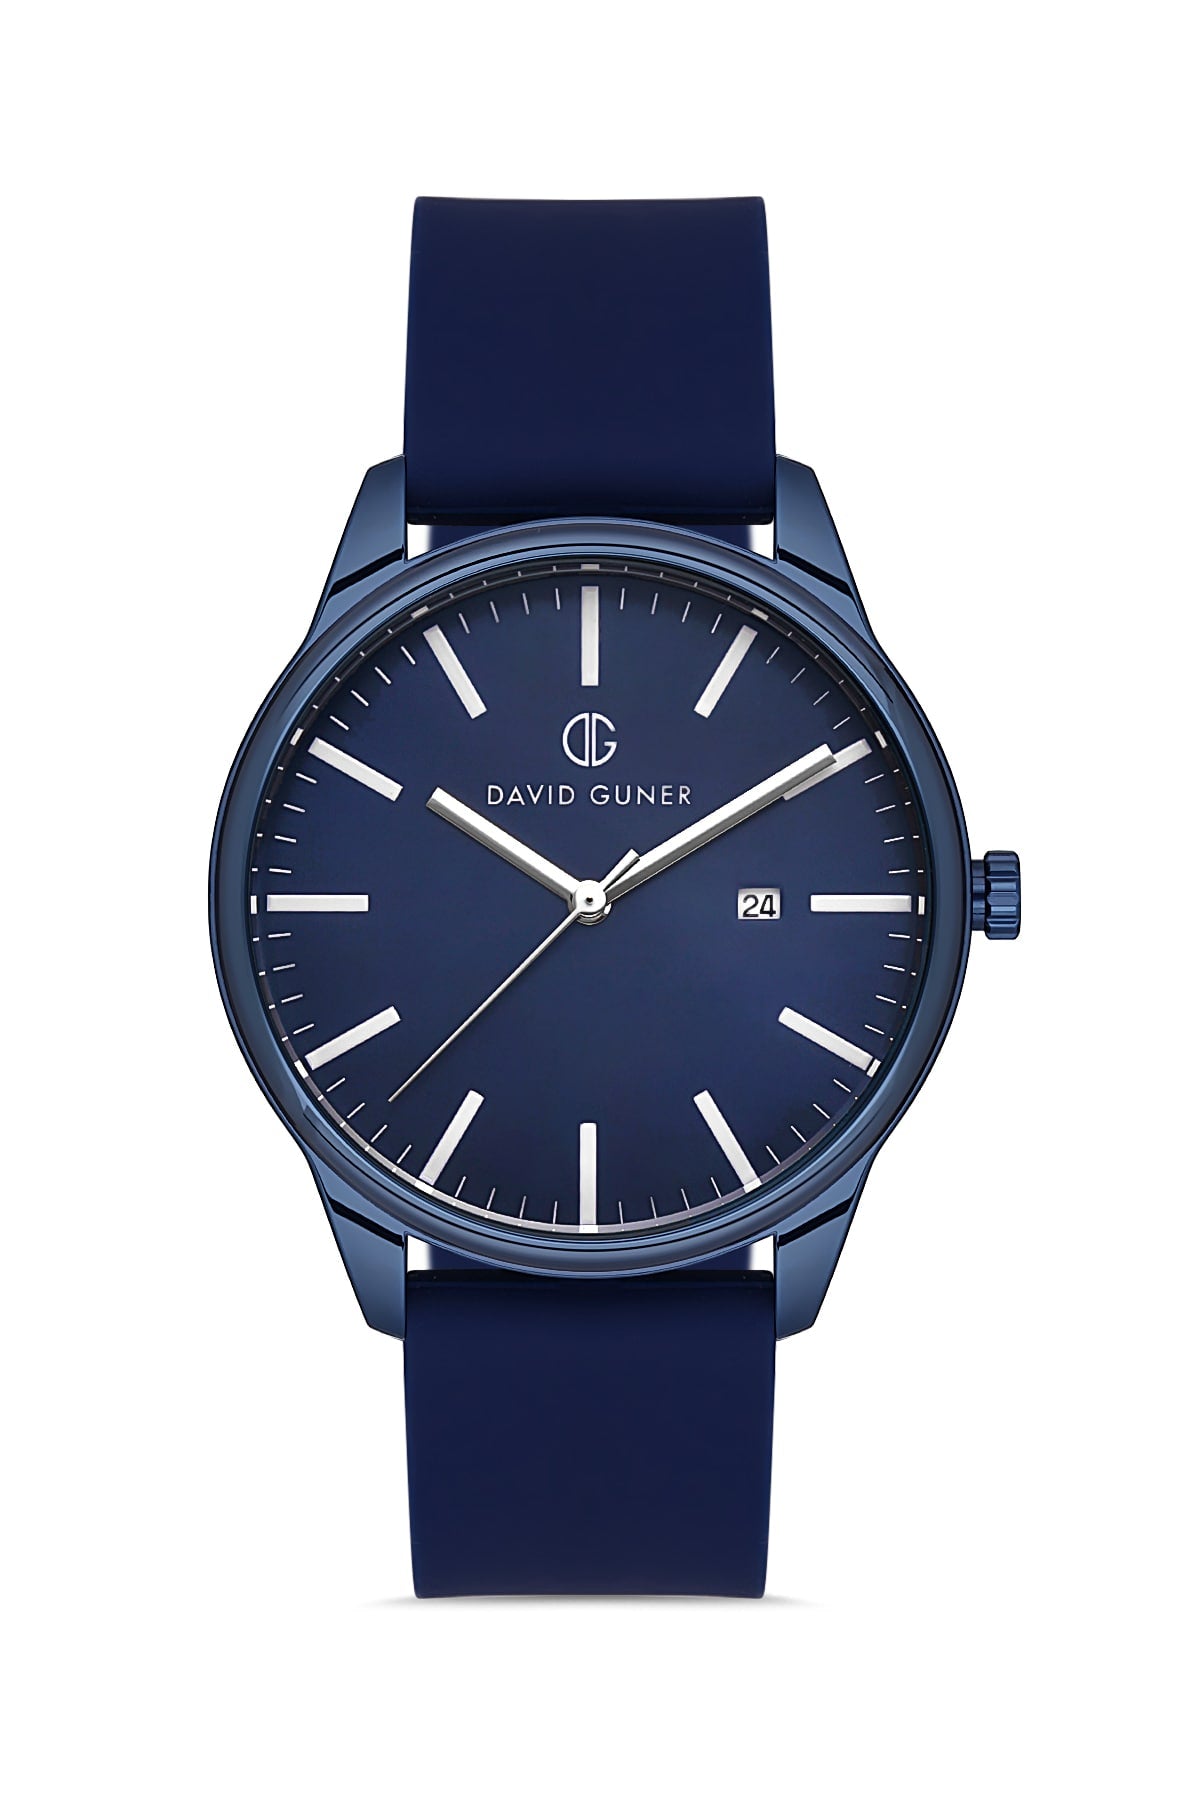 DAVID GUNER Navy Blue Coated Men's Wristwatch with Calendar and Navy Blue Silicone Strap